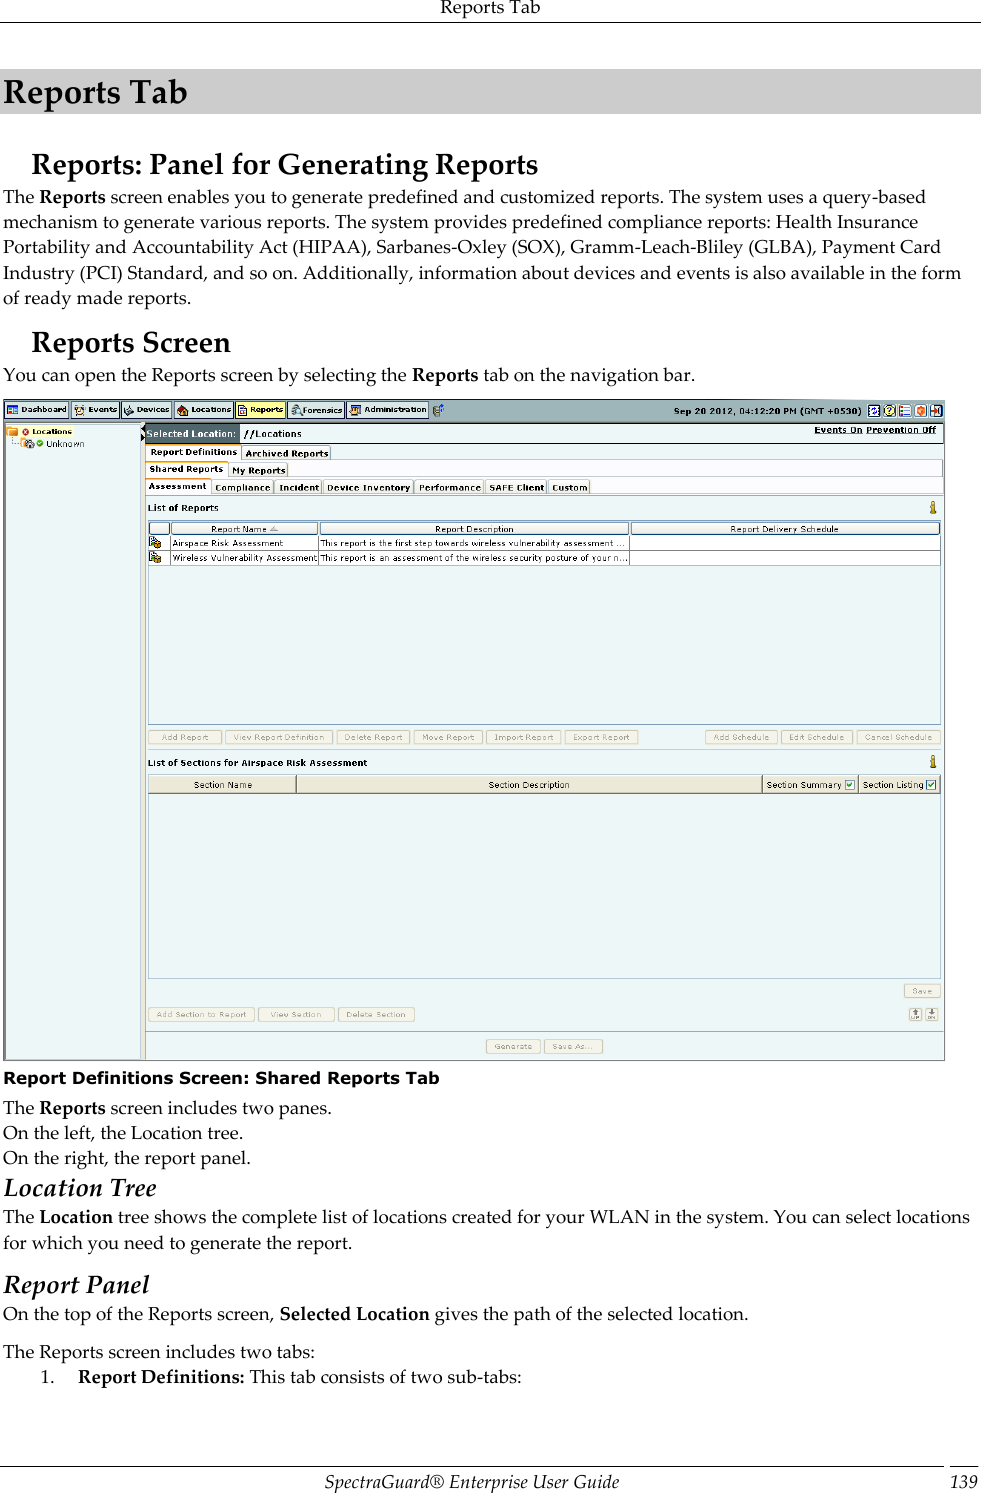 Reports Tab SpectraGuard®  Enterprise User Guide 139 Reports Tab Reports: Panel for Generating Reports The Reports screen enables you to generate predefined and customized reports. The system uses a query-based mechanism to generate various reports. The system provides predefined compliance reports: Health Insurance Portability and Accountability Act (HIPAA), Sarbanes-Oxley (SOX), Gramm-Leach-Bliley (GLBA), Payment Card Industry (PCI) Standard, and so on. Additionally, information about devices and events is also available in the form of ready made reports. Reports Screen You can open the Reports screen by selecting the Reports tab on the navigation bar.  Report Definitions Screen: Shared Reports Tab The Reports screen includes two panes. On the left, the Location tree. On the right, the report panel. Location Tree The Location tree shows the complete list of locations created for your WLAN in the system. You can select locations for which you need to generate the report. Report Panel On the top of the Reports screen, Selected Location gives the path of the selected location. The Reports screen includes two tabs: 1. Report Definitions: This tab consists of two sub-tabs: 